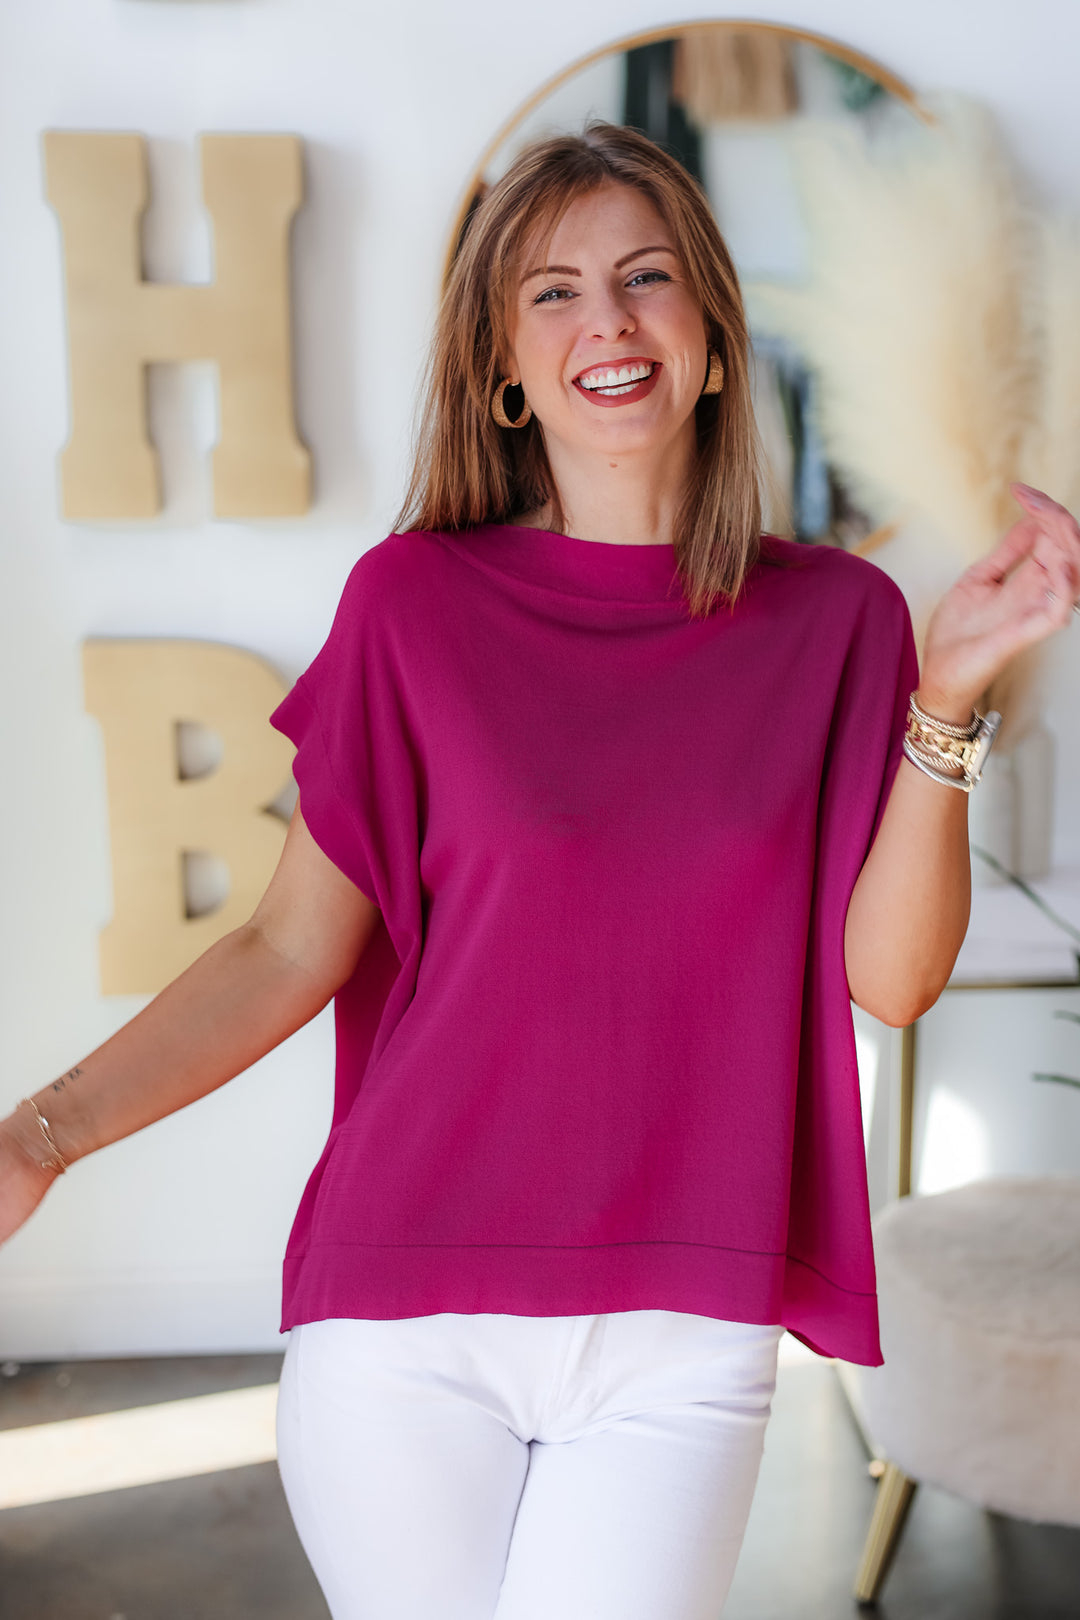 A brunette woman standing in a shop wearing a purple oversized boatneck top and white jeans.